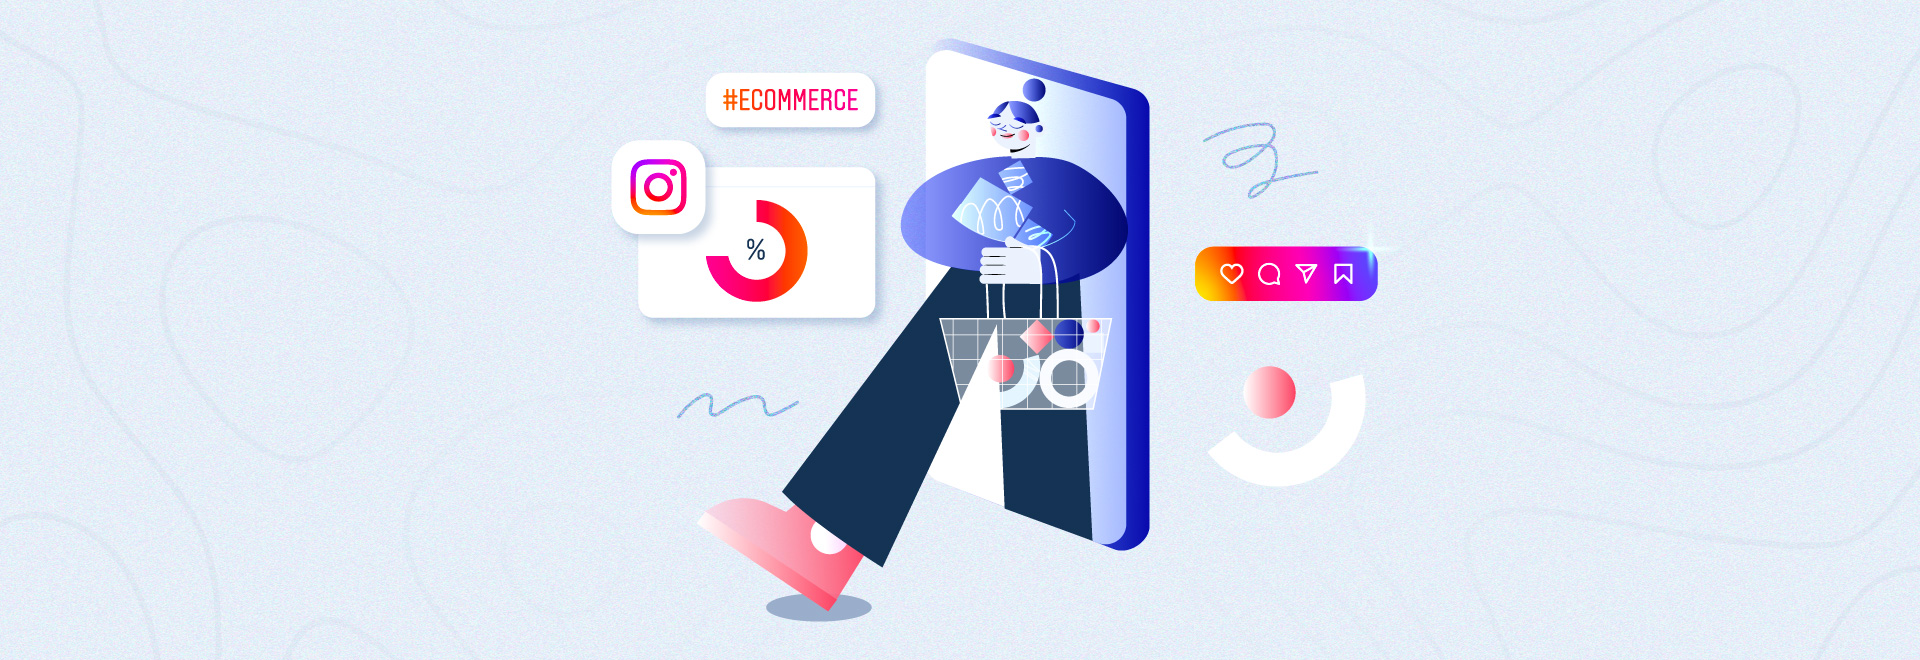 A Complete Guide to Instagram eCommerce